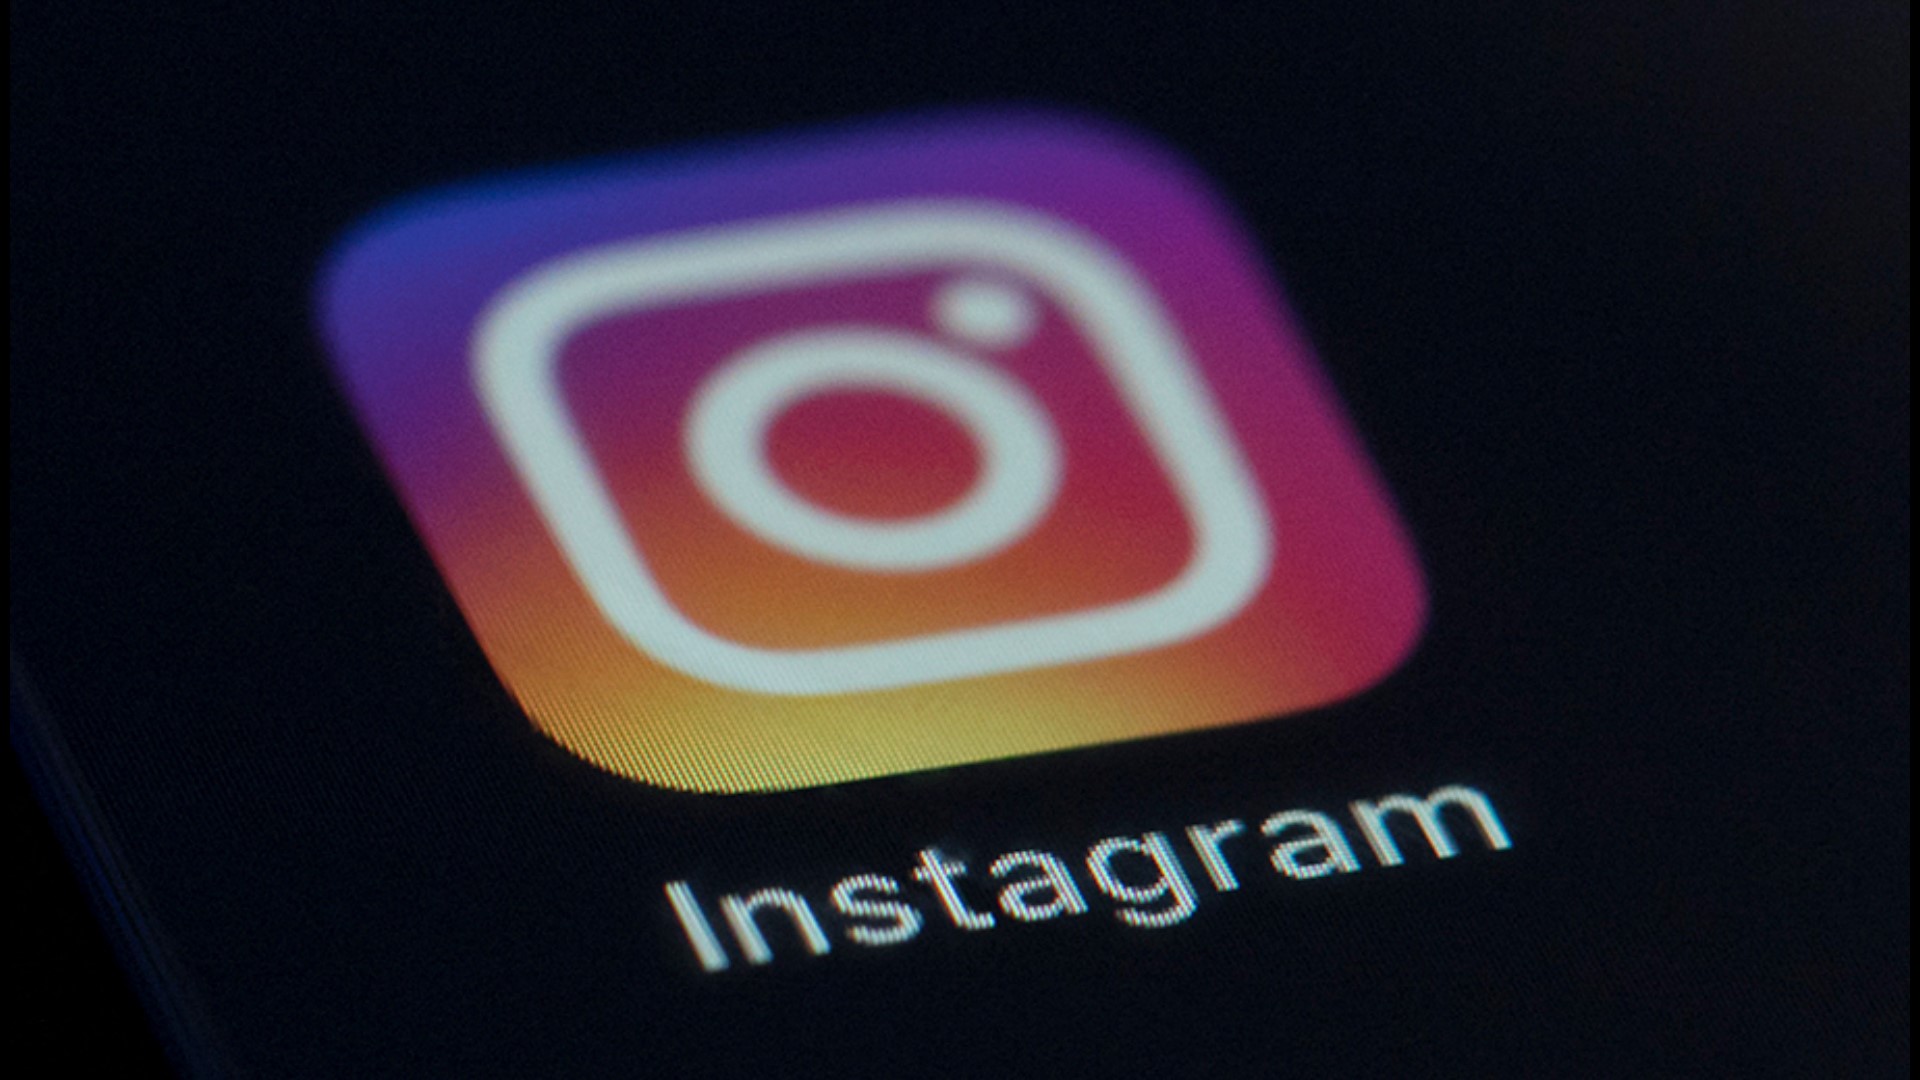 Instagram is testing ways to verify the age of people using its service, but users are skeptical about how the company will use its data.